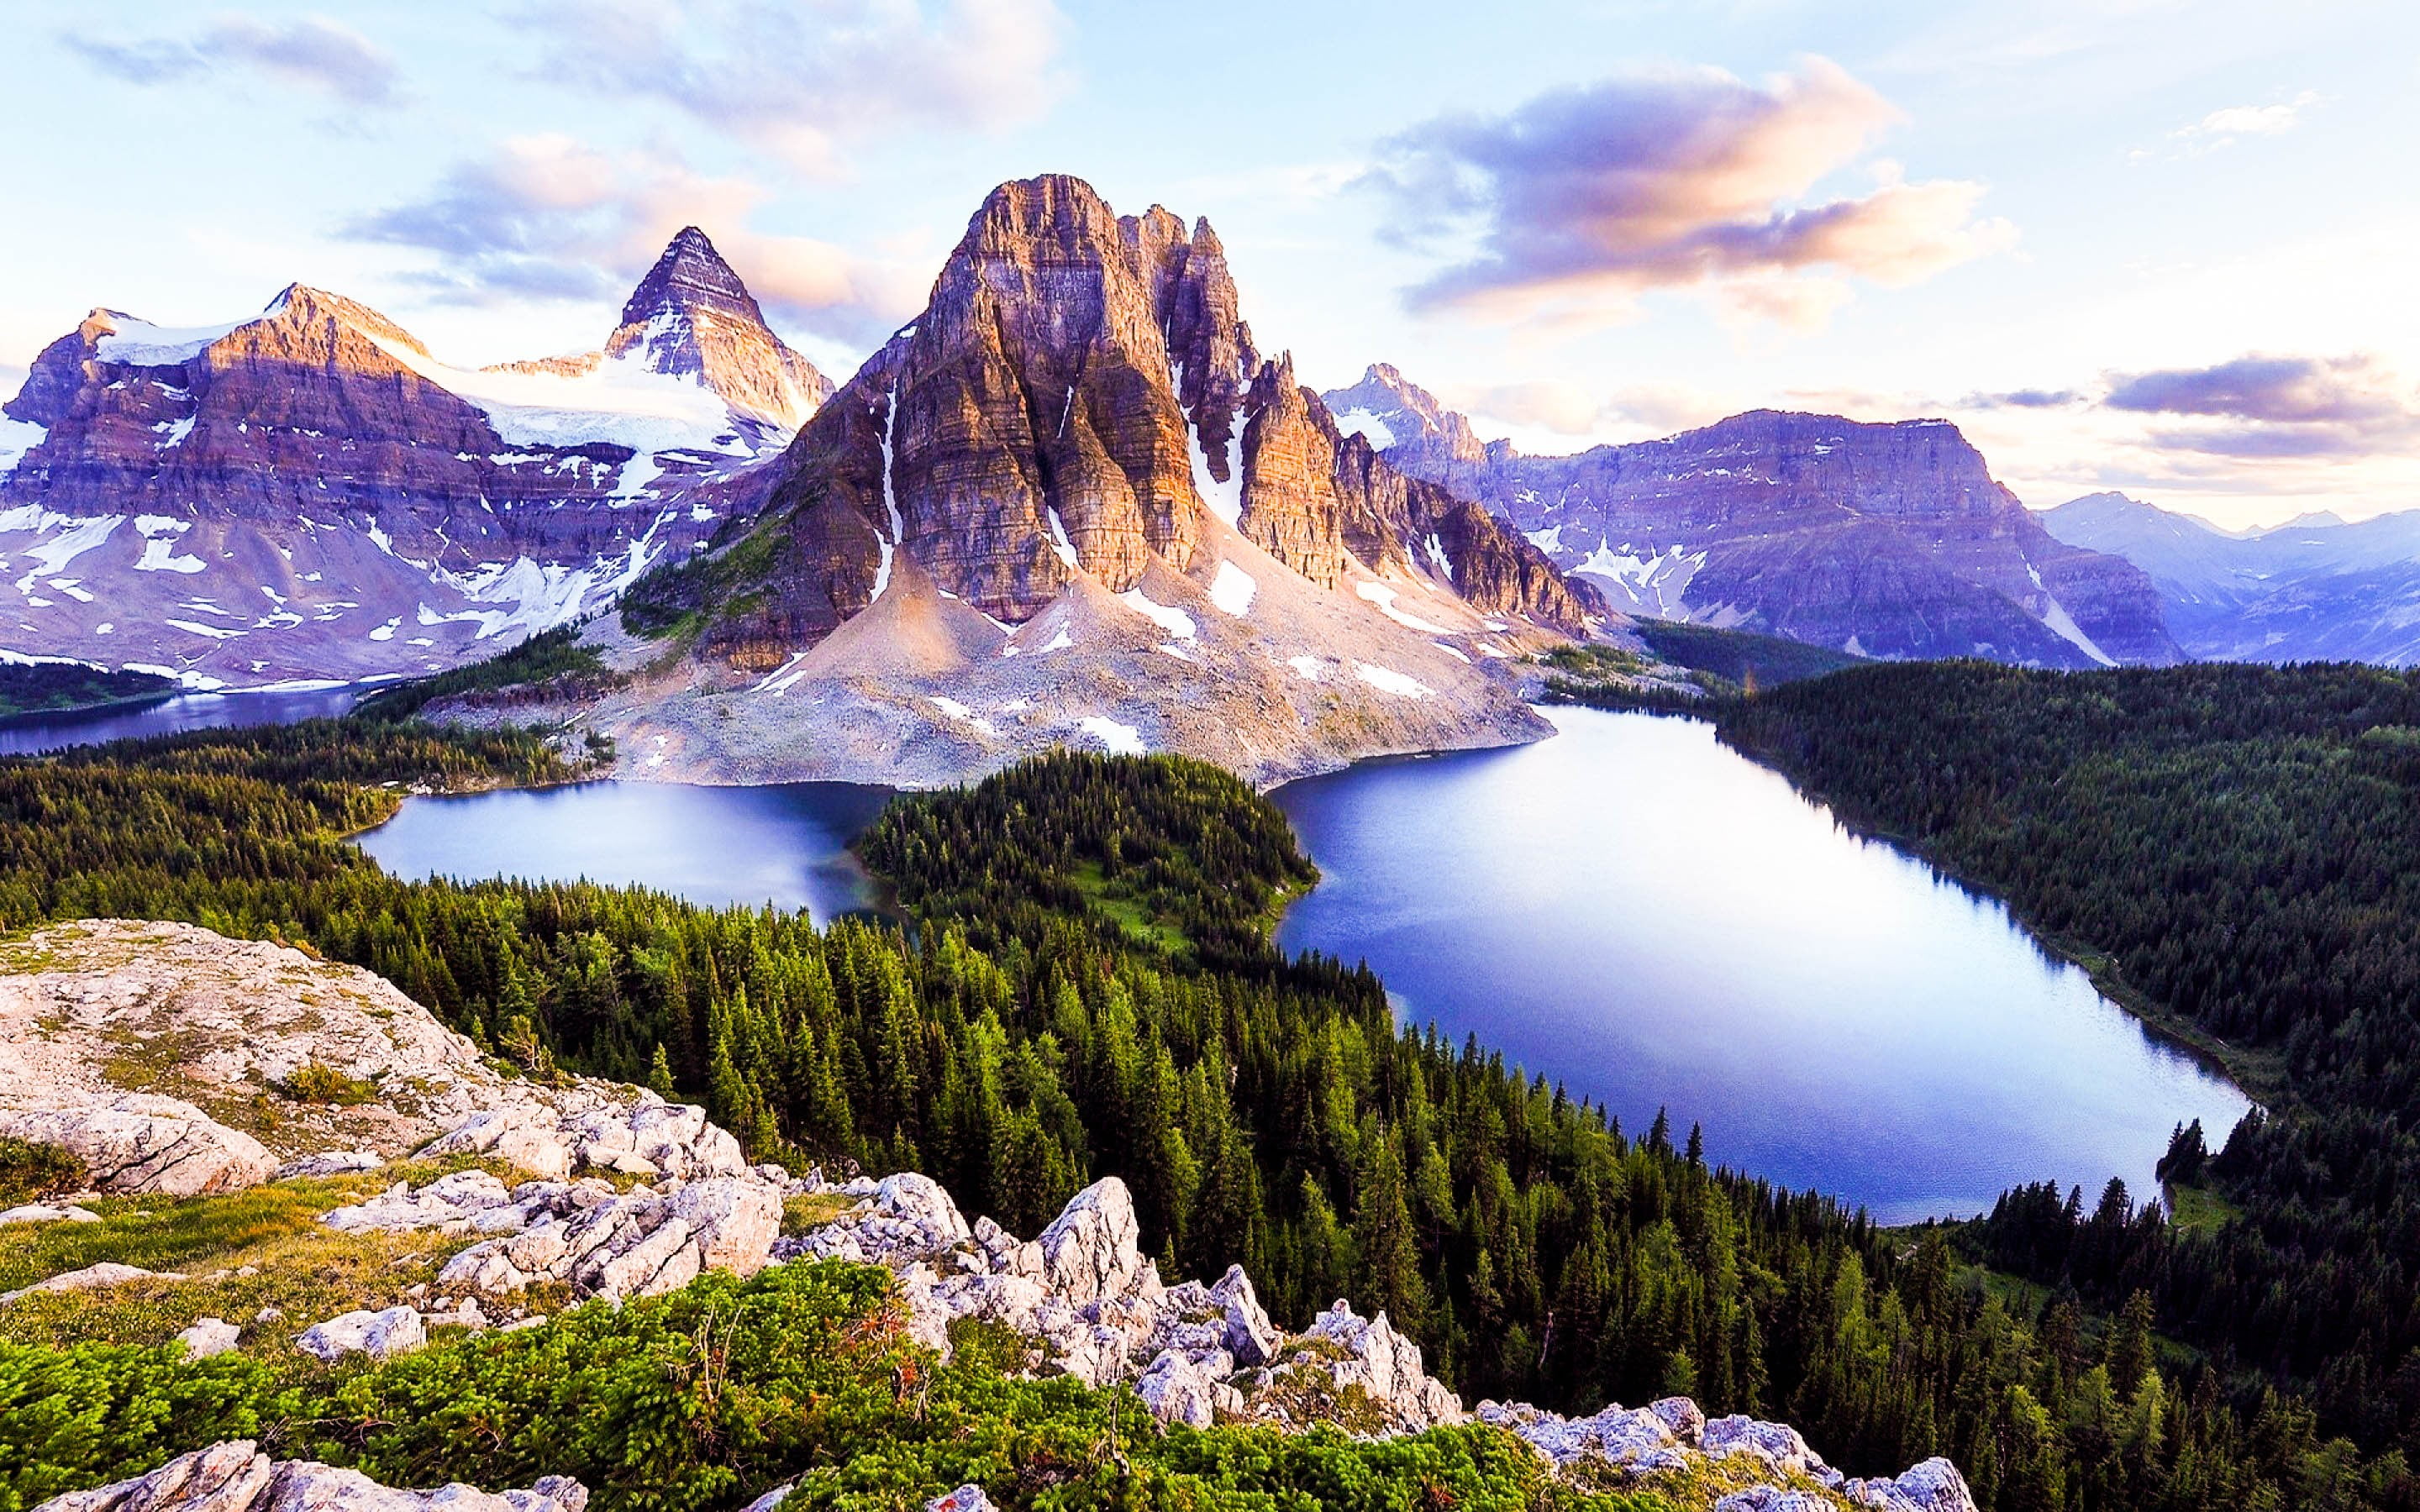 mountain range with lake surrounded by pine trees, landscape, nature, mountains, lake